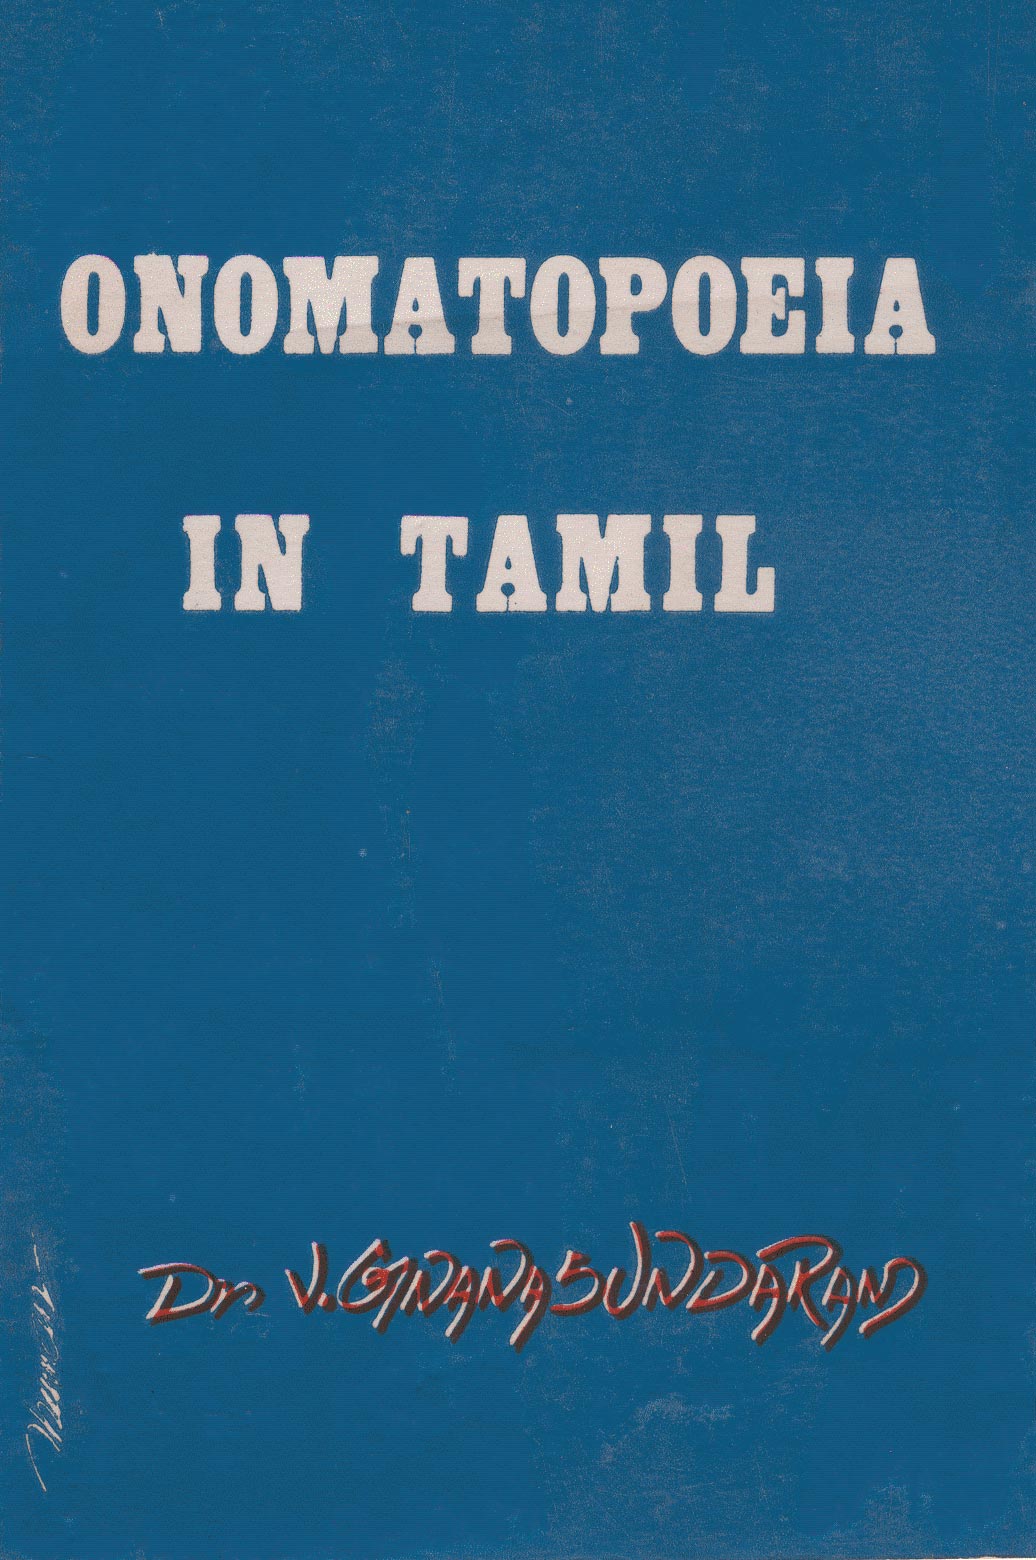 Book Cover of Onomatopoeia in Tamil